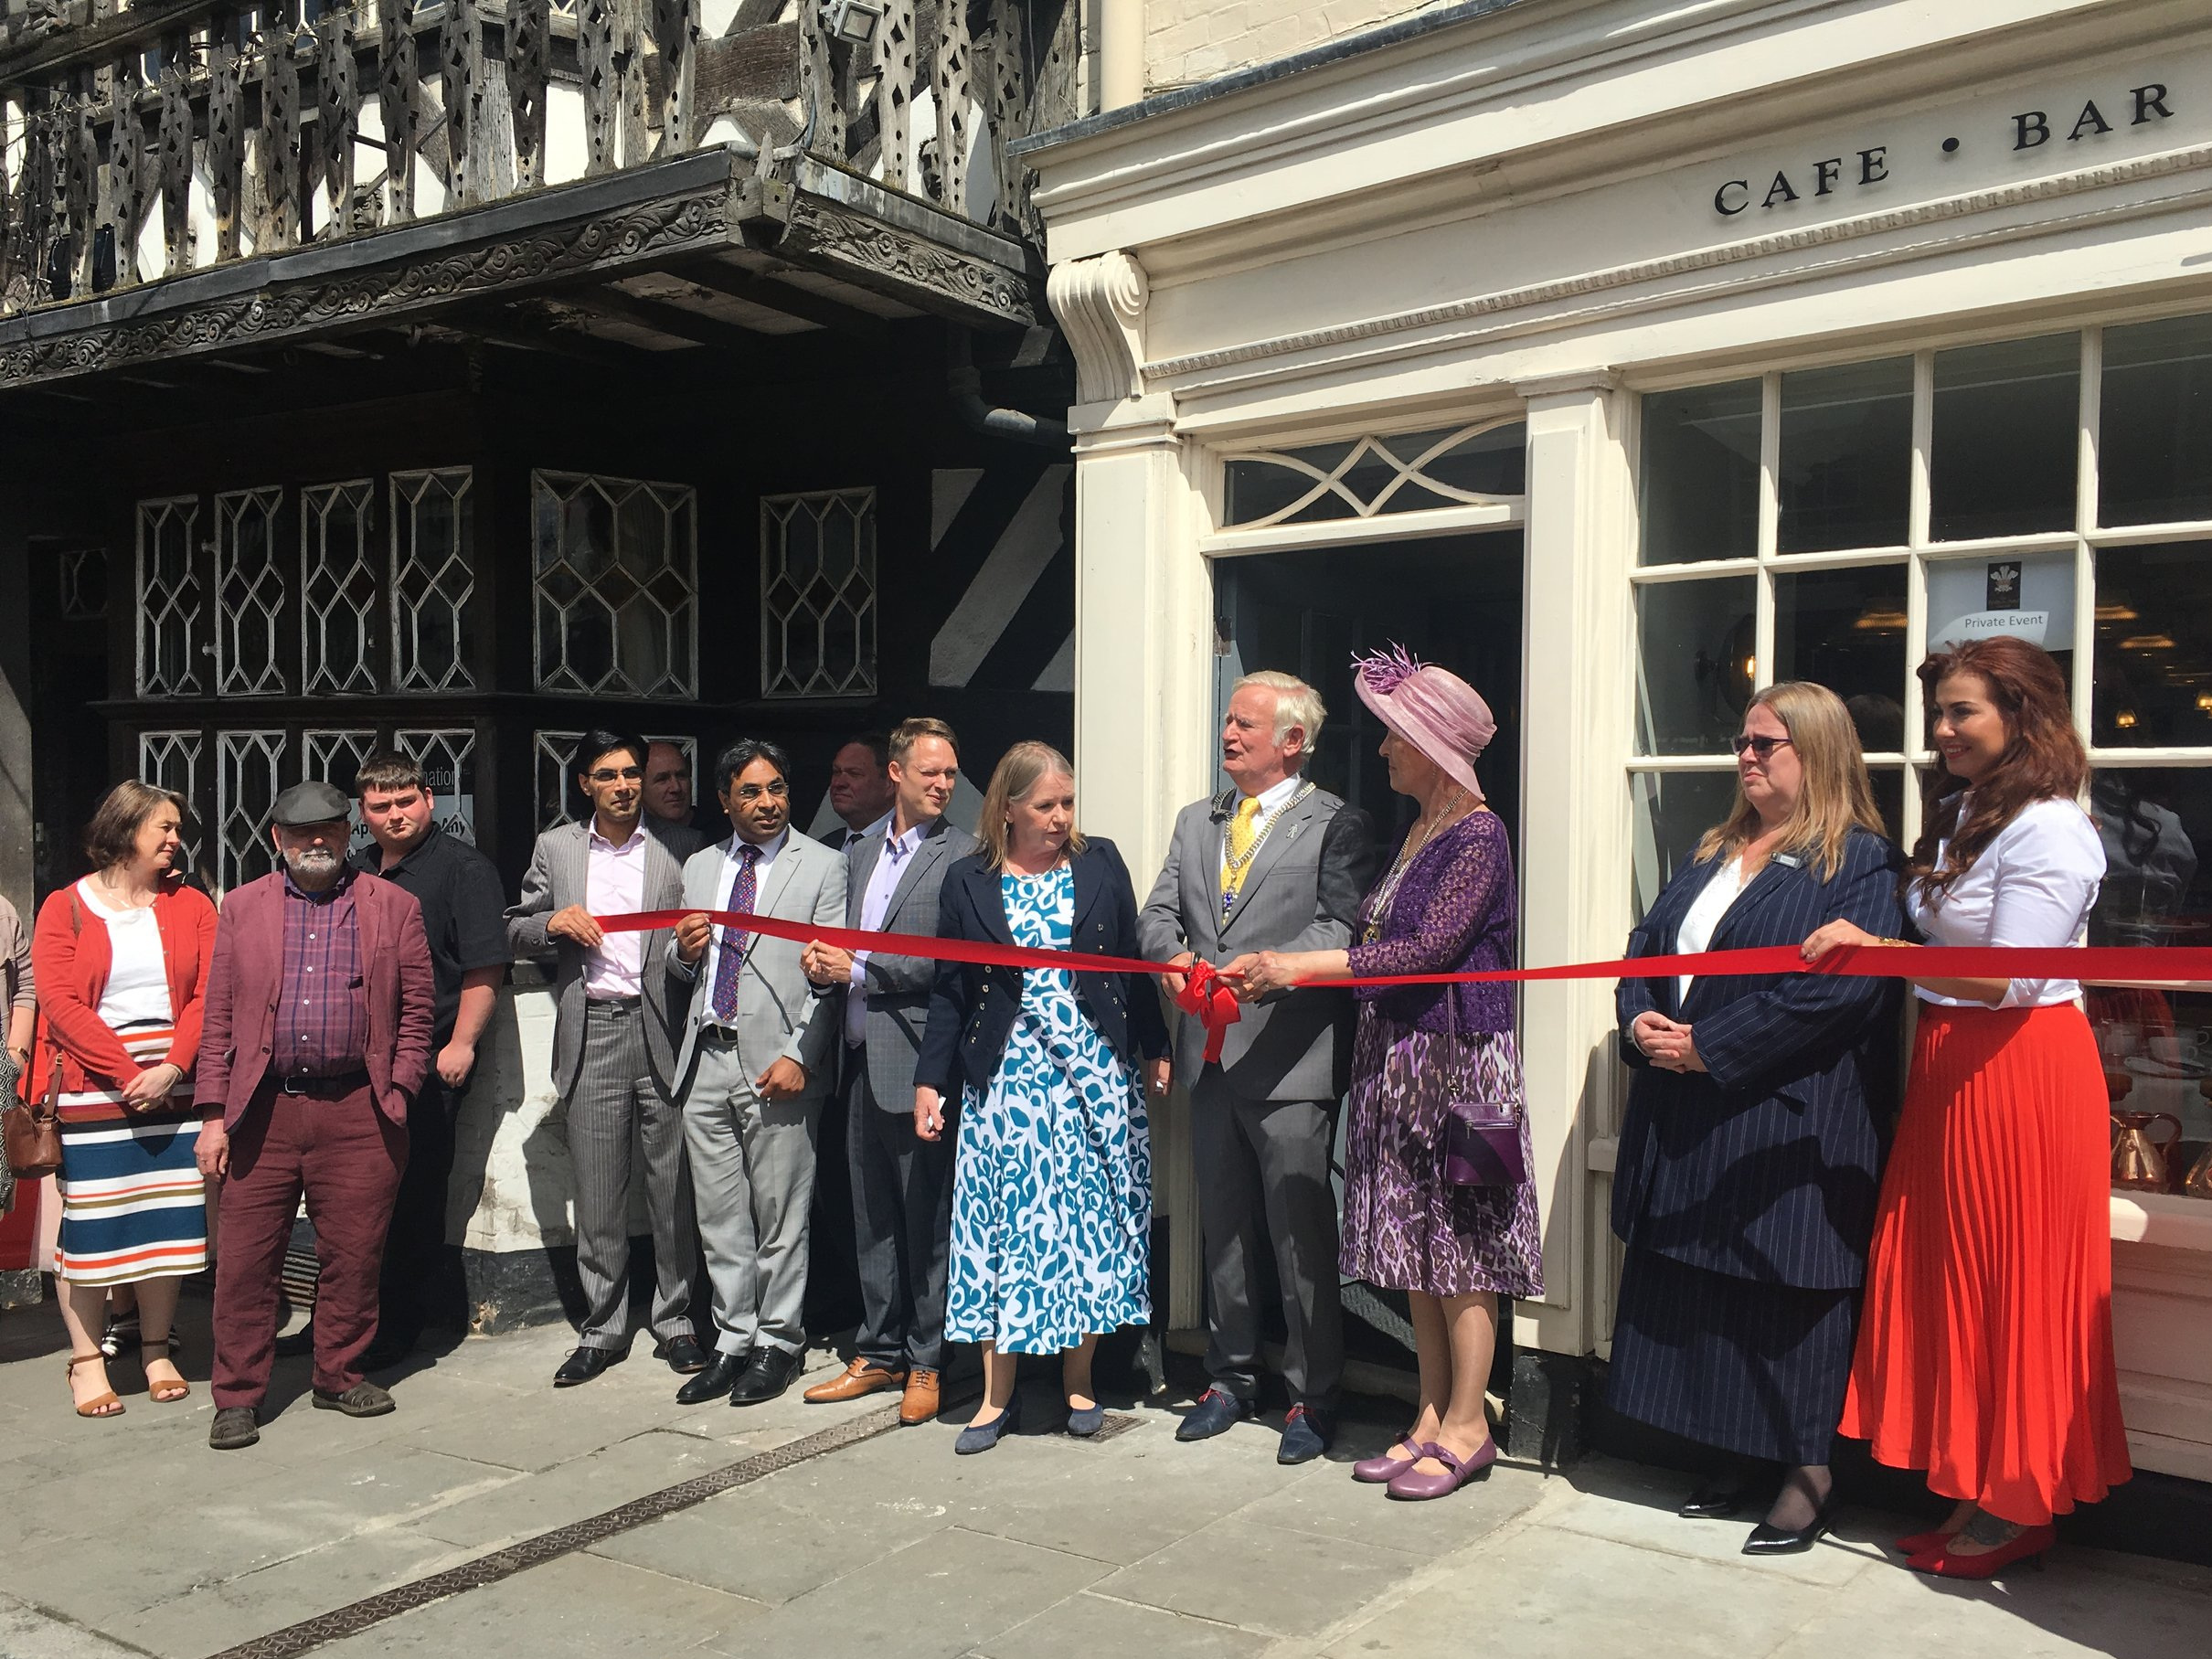 Ribbon cutting ceremony for The Feathers Hotel newly opened Tea Room